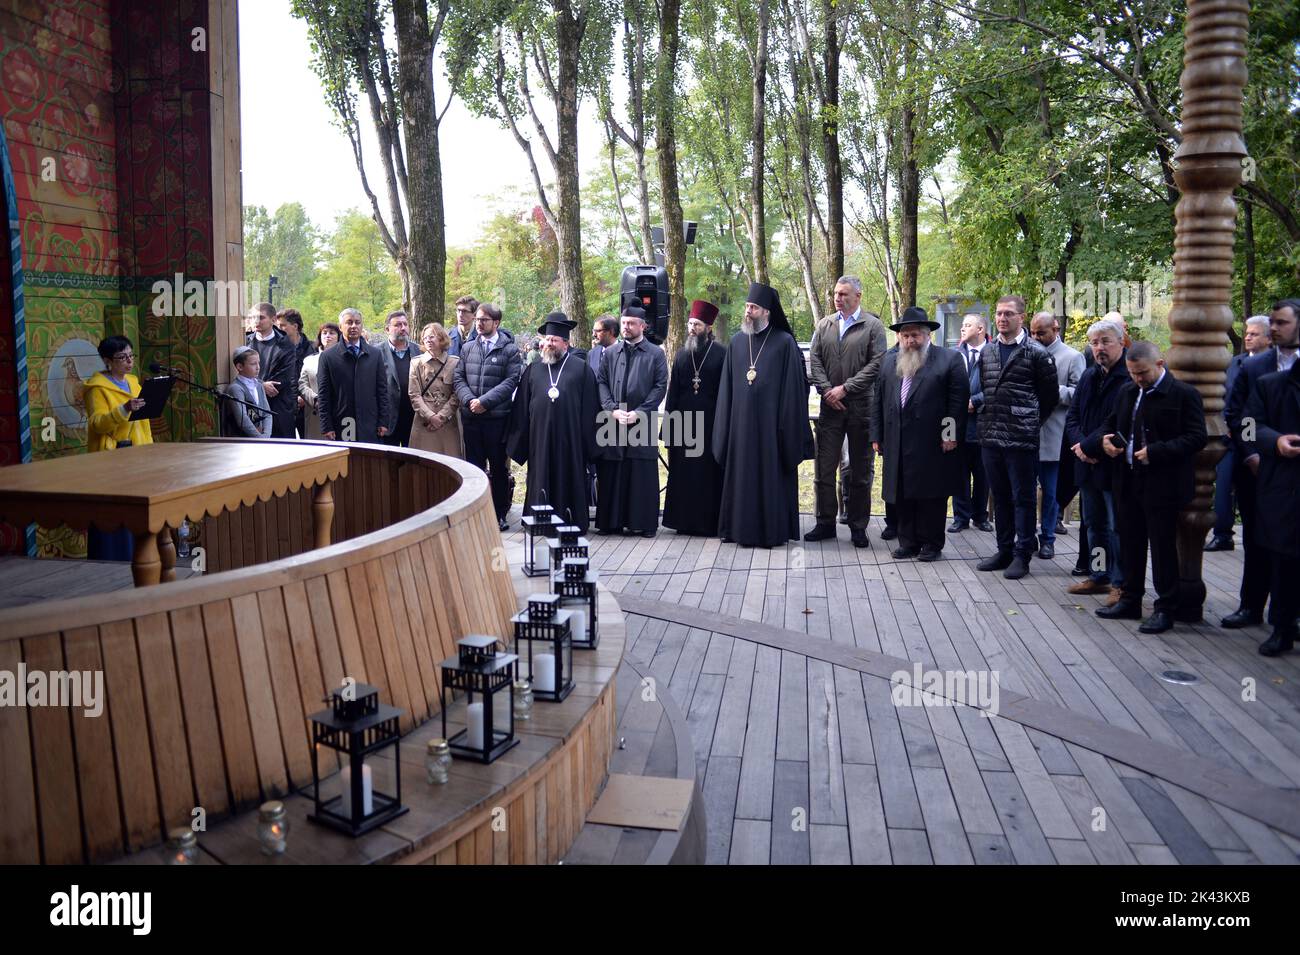 KYIV, UKRAINE - SEPTEMBER 29, 2022 - Participants of a joint interreligious prayer dedicated to the Day of Remembrance of the Babyn Yar Victims are seen at the symbolic Place for Reflection synagogue on the territory of the Babyn Yar National Historical and Memorial Reserve, Kyiv, capital of Ukraine. Stock Photo